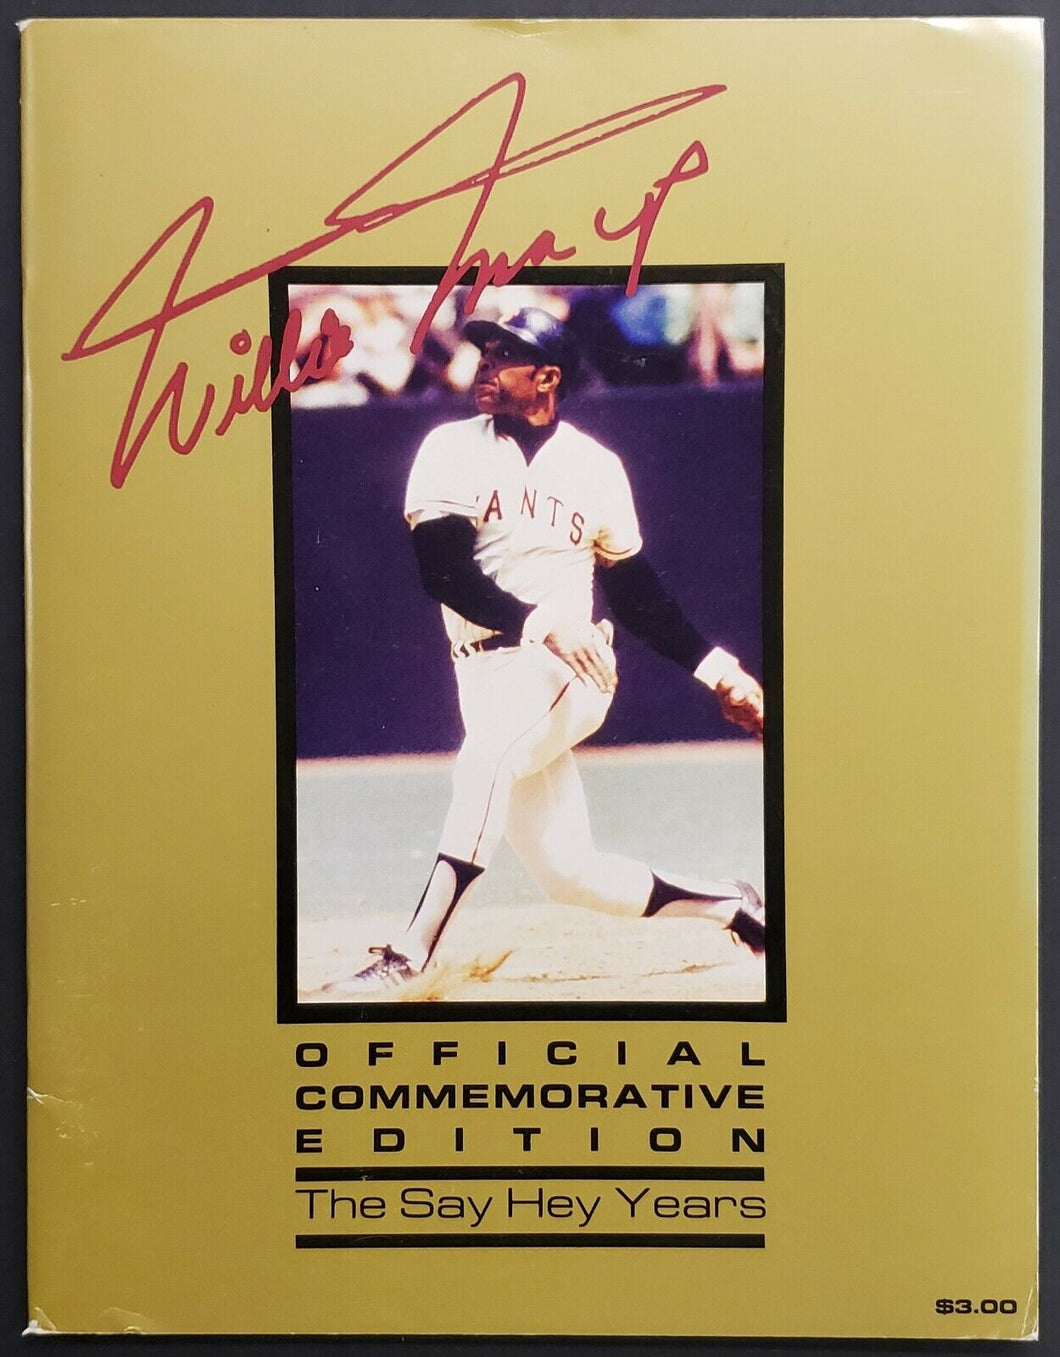 1983 Program Commemorative Edition The Say Hey Years SF Giants Willie Mays MLB